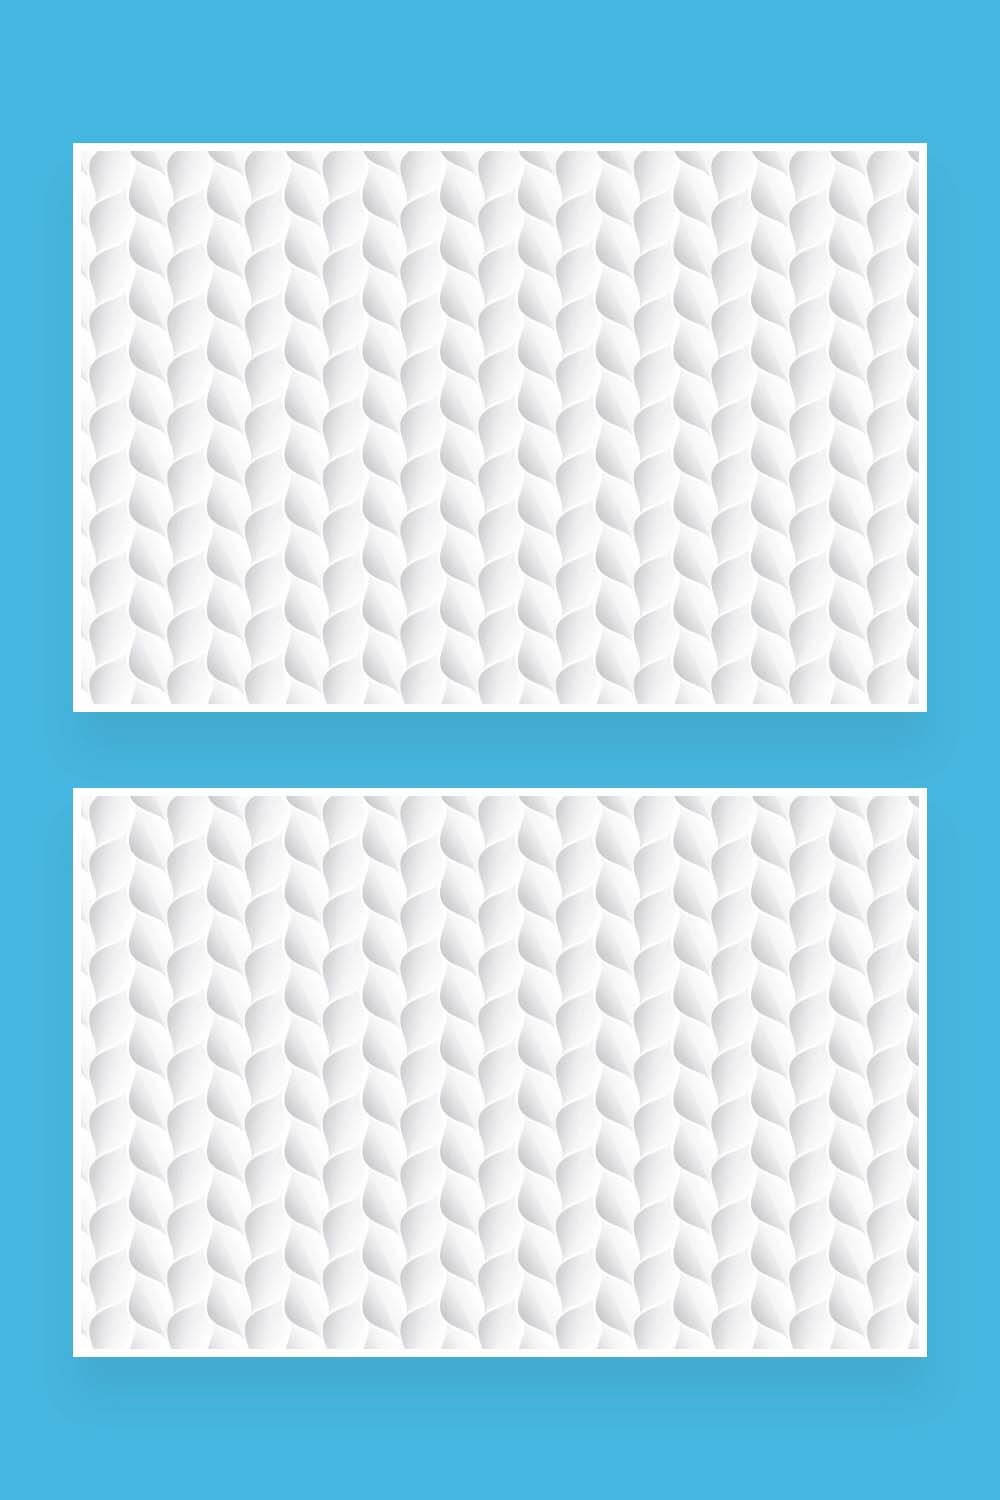 White decorative seamless texture in the form of a pigtail.